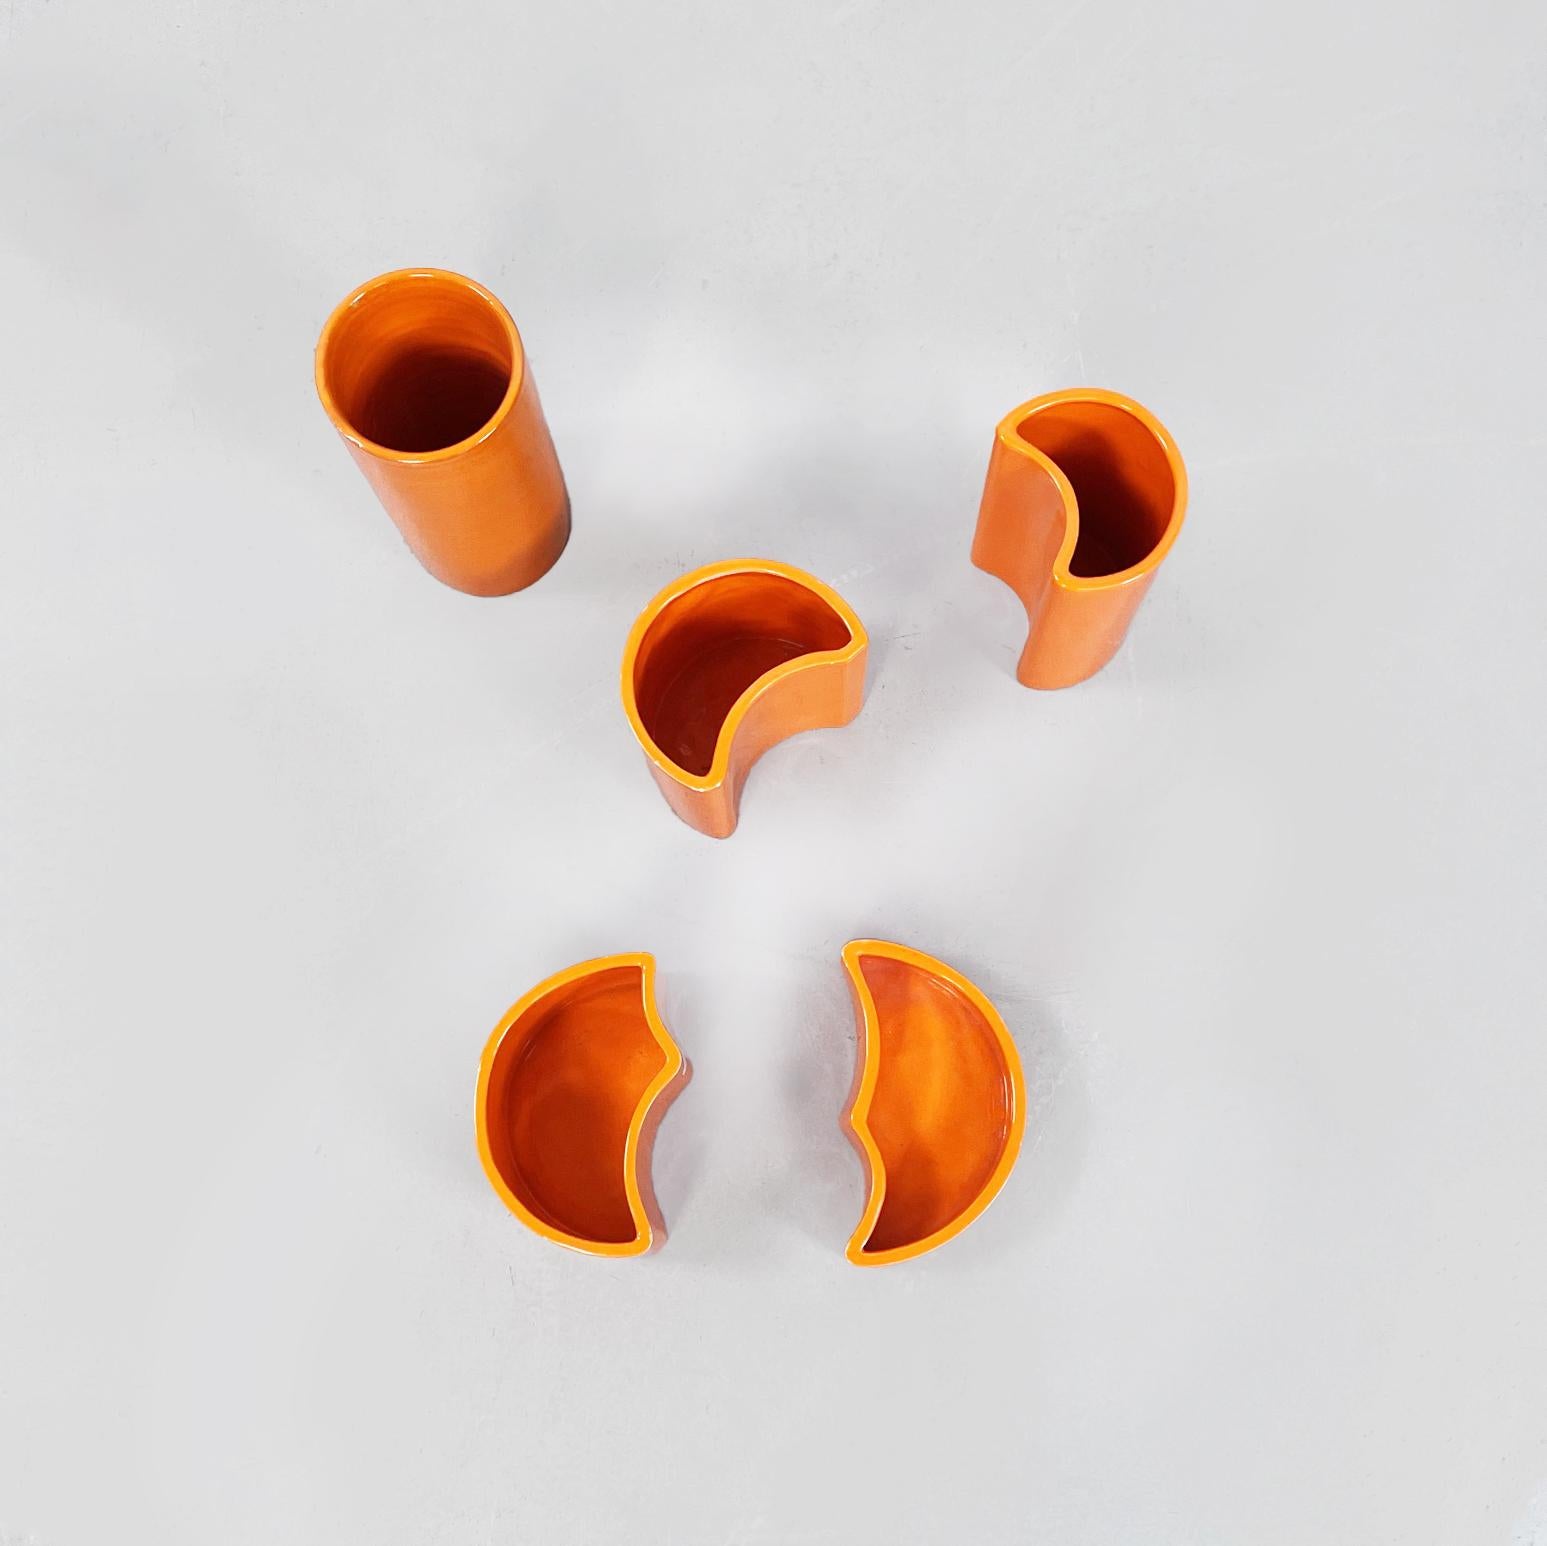 Italian mid-century orange ceramic cylindrical, half-moon and irregular vases, 1970s
Set of five orange ceramic vases. The highest is cylindrical shape, in succession there are two crescent-shaped, while the two lowest are irregular